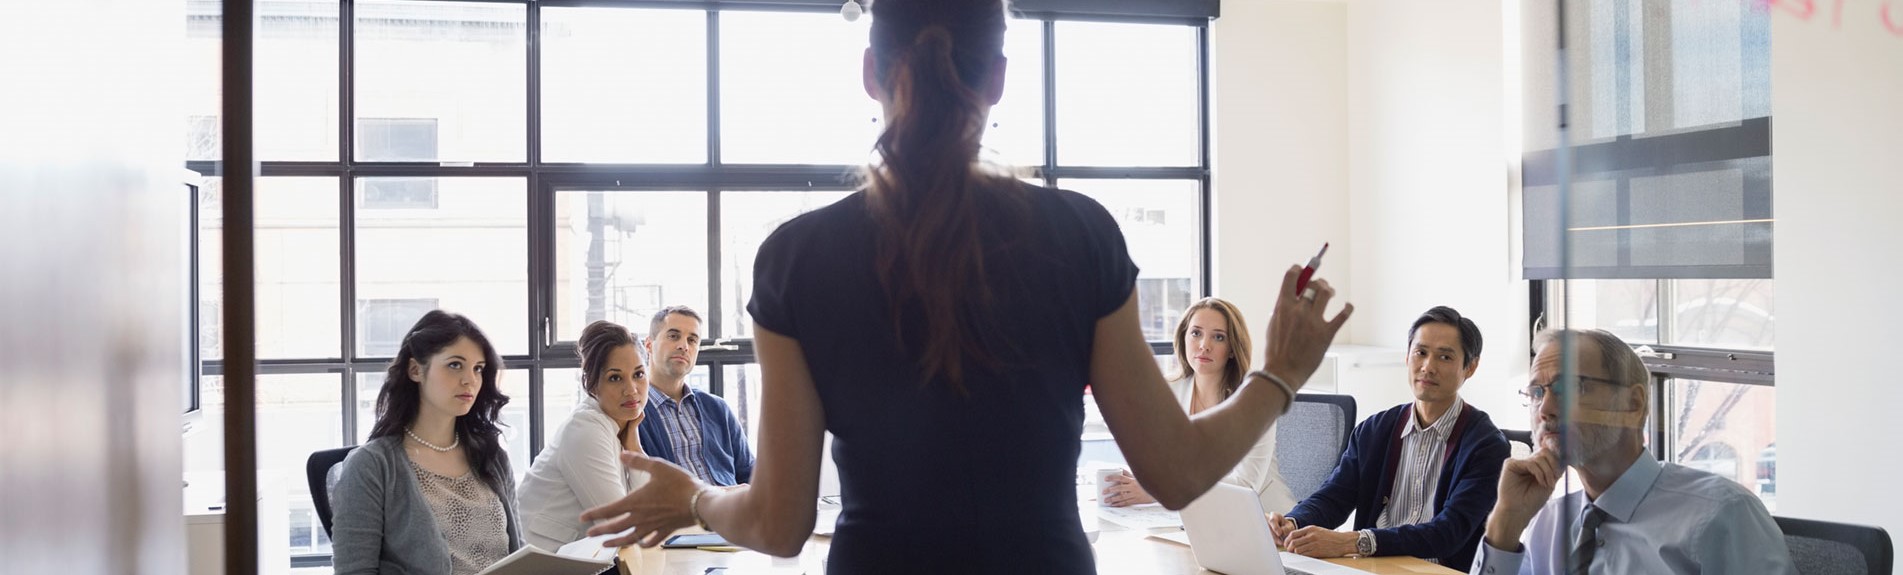 Businesswoman Leading Meeting In Conference Room